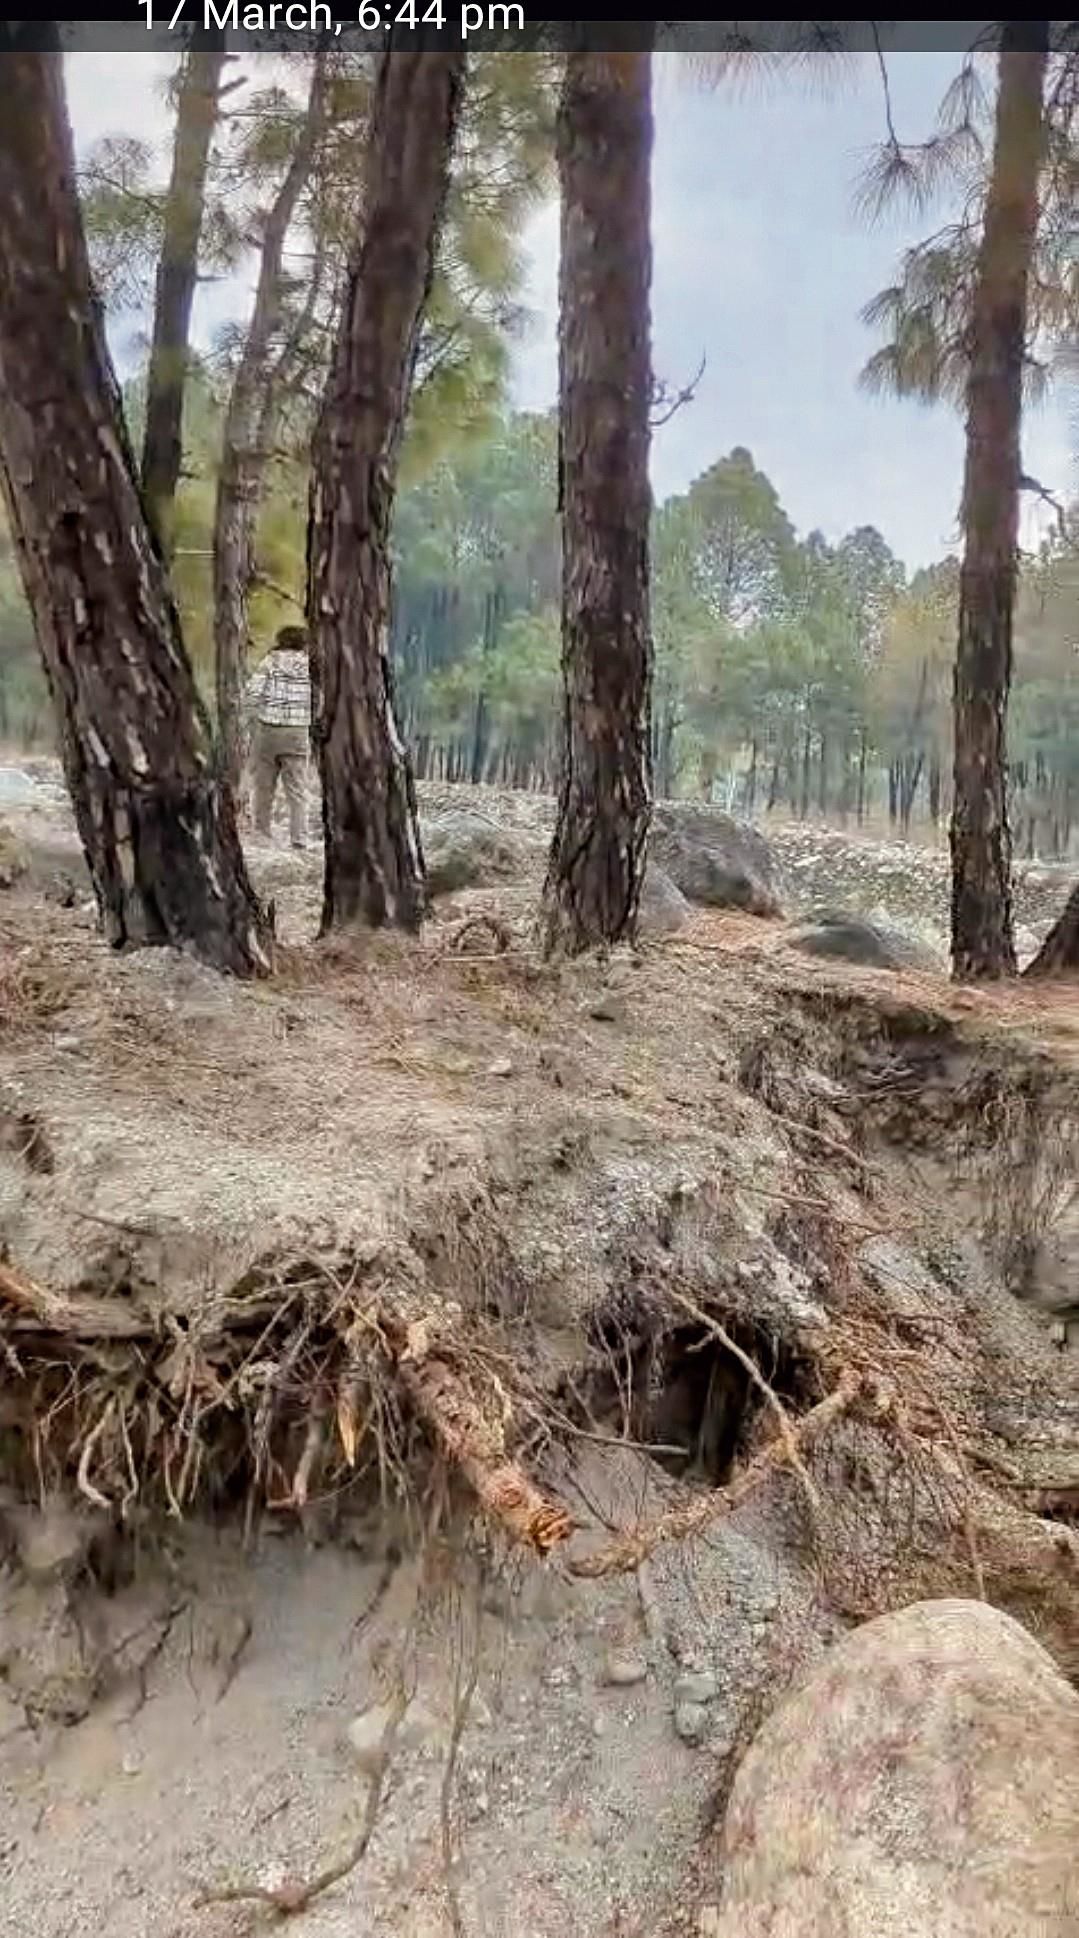 Pine trees damaged by illegal mining on Neugal river bank